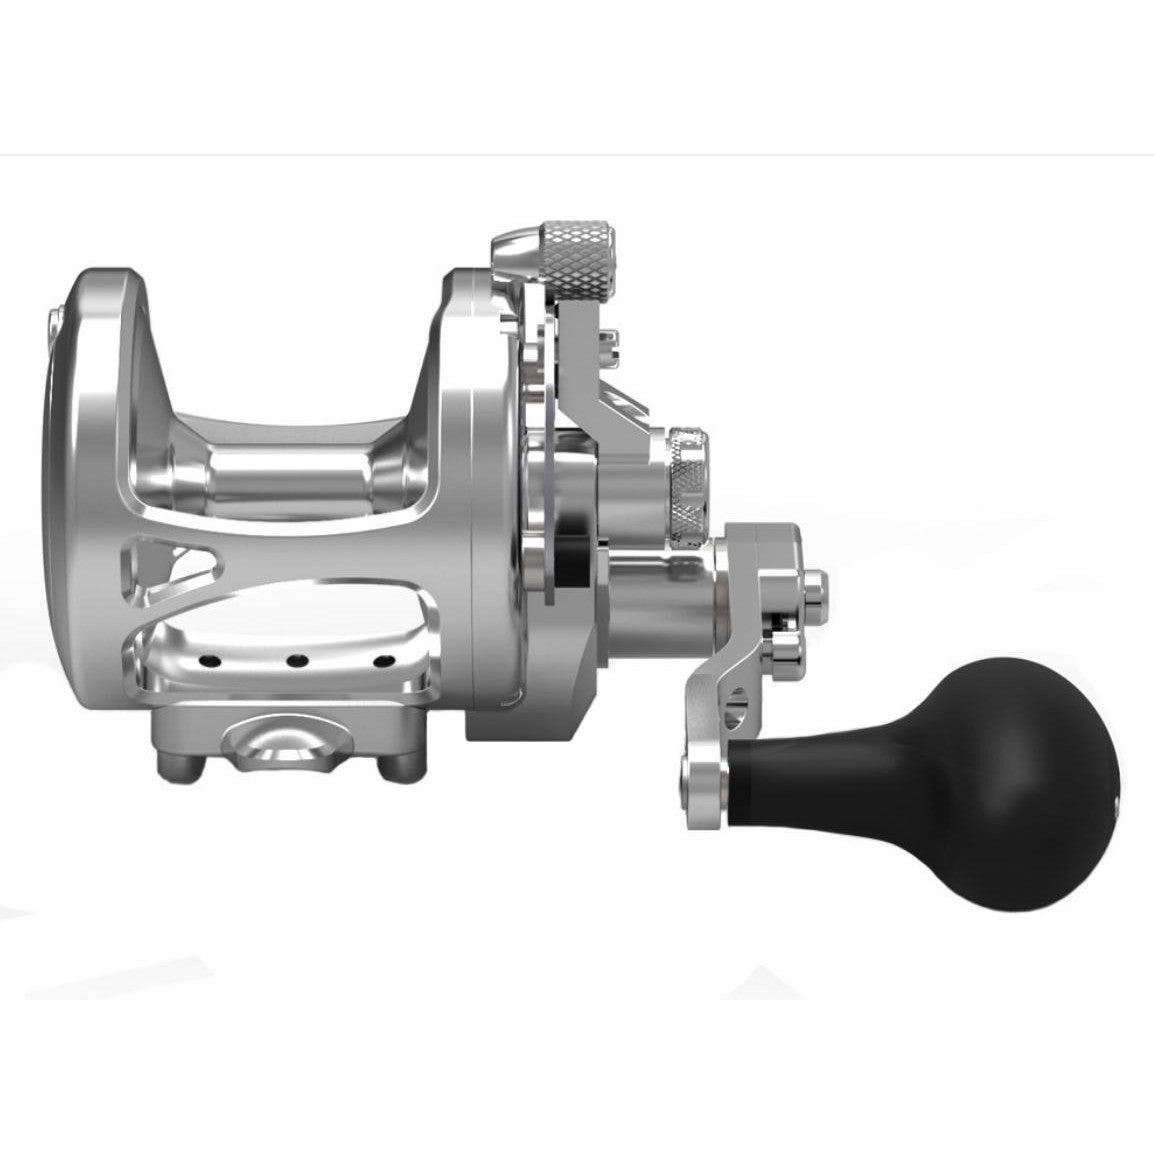 Accurate Tern 2 Conventional Star Drag Reels